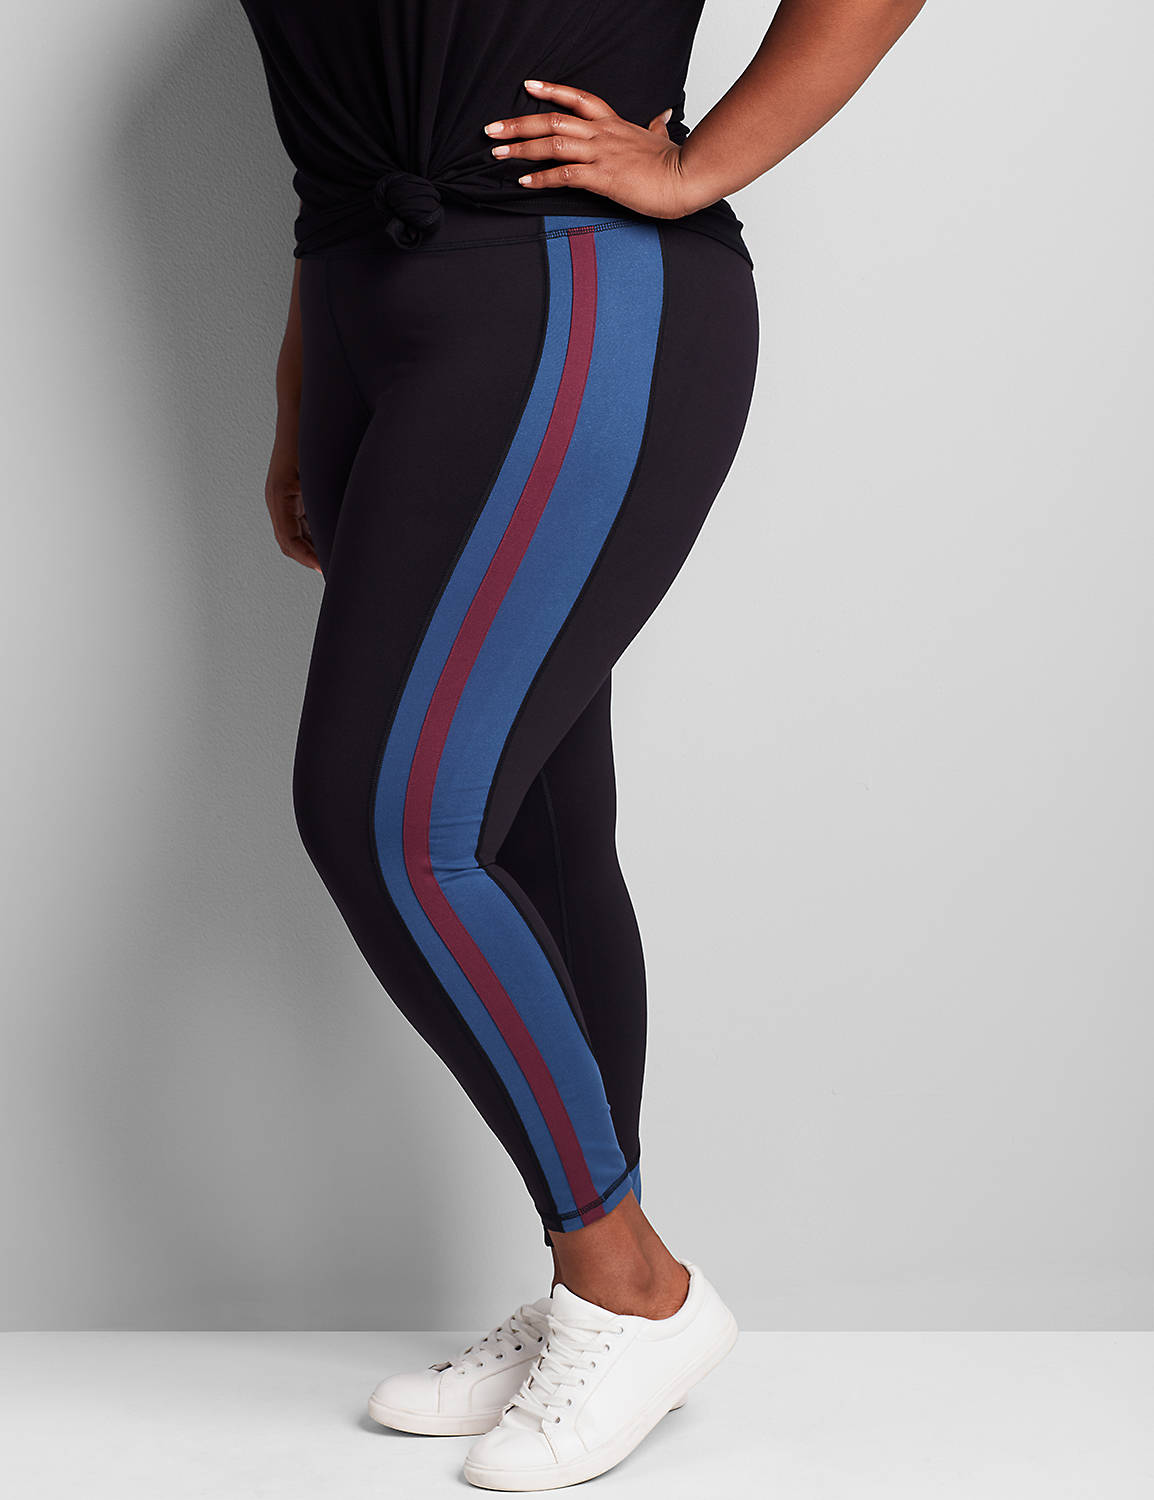 Power Color Block Wicking 7/8 Legging F 1114130:Club Navy 73-0002-19:22/24 Product Image 1